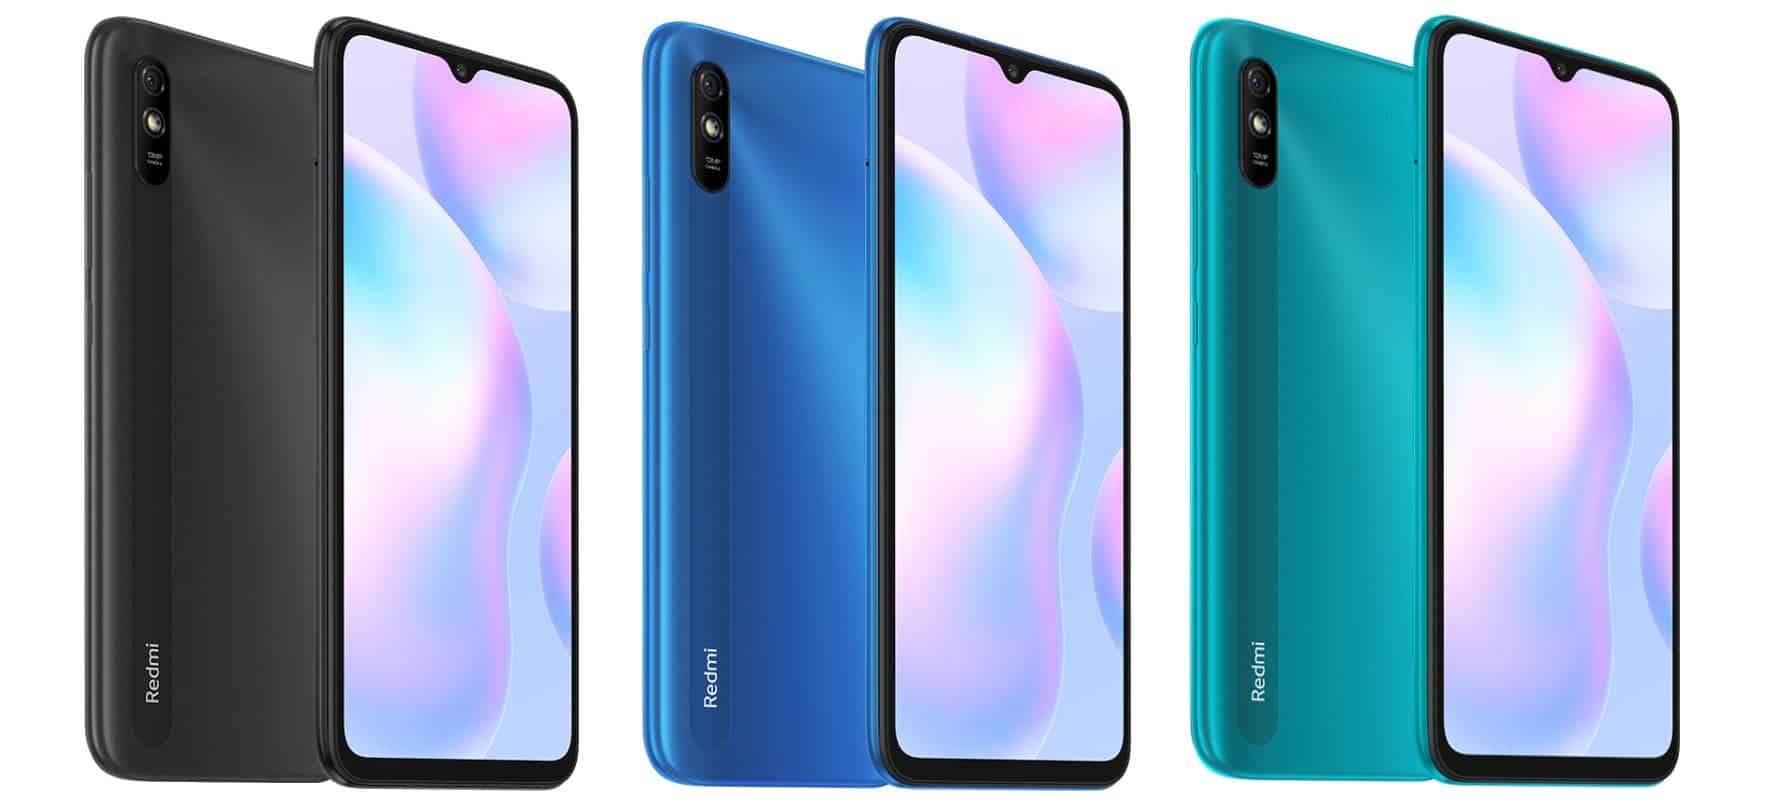 Redmi 9A becomes the best-selling Android phone on JD.com 618 event